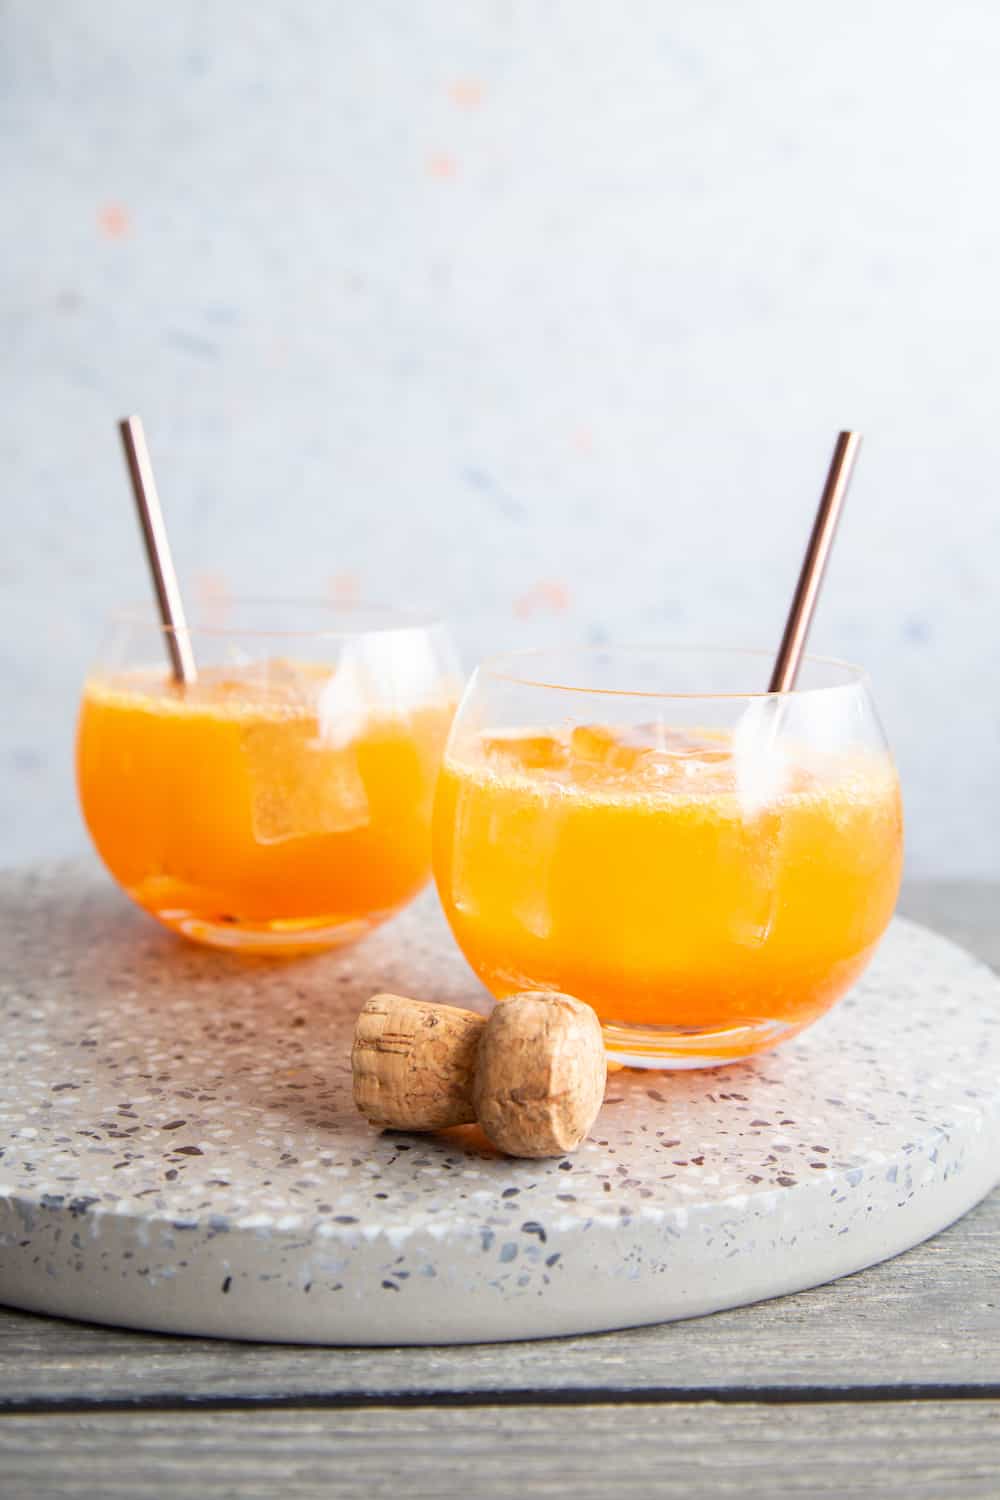 Break Out the Champagne for a Tequila Sunrise Spritz